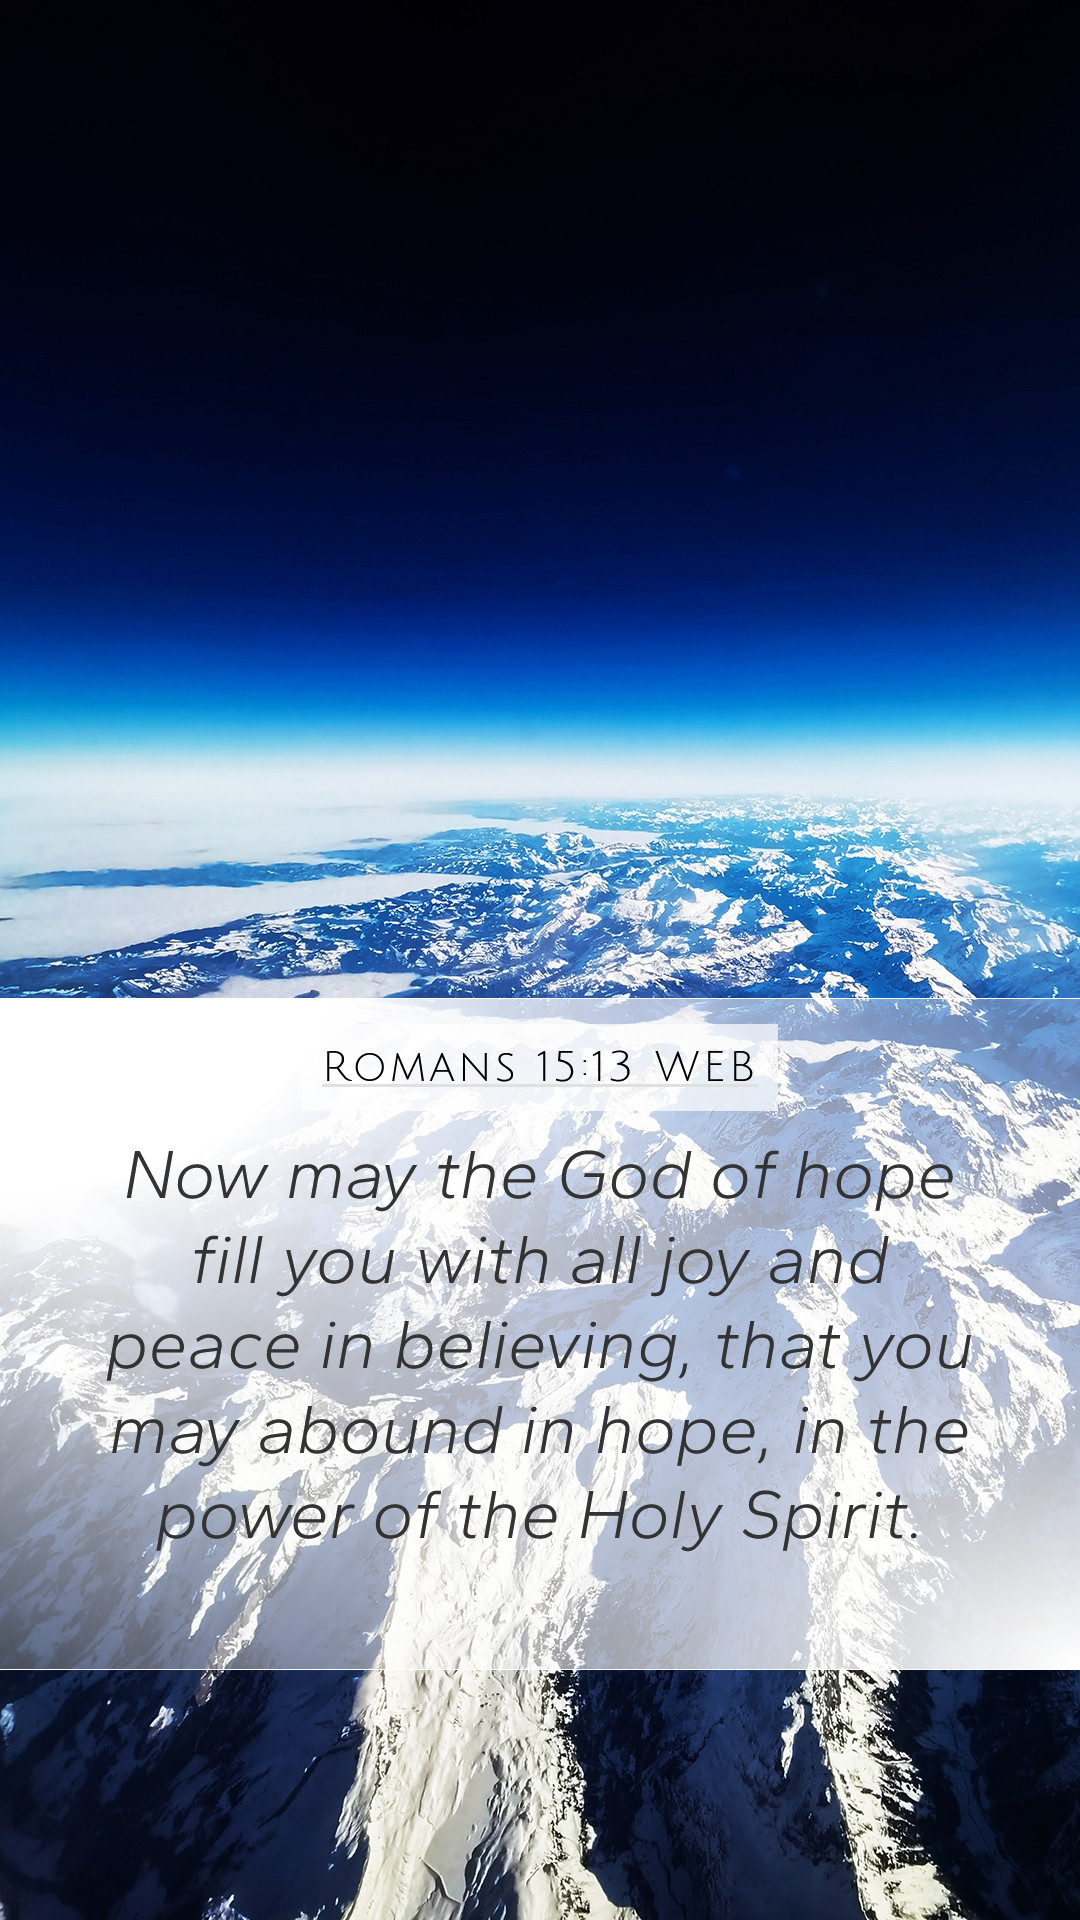 Romans 15:13 WEB Mobile Phone Wallpaper may the God of hope fill you with all joy and